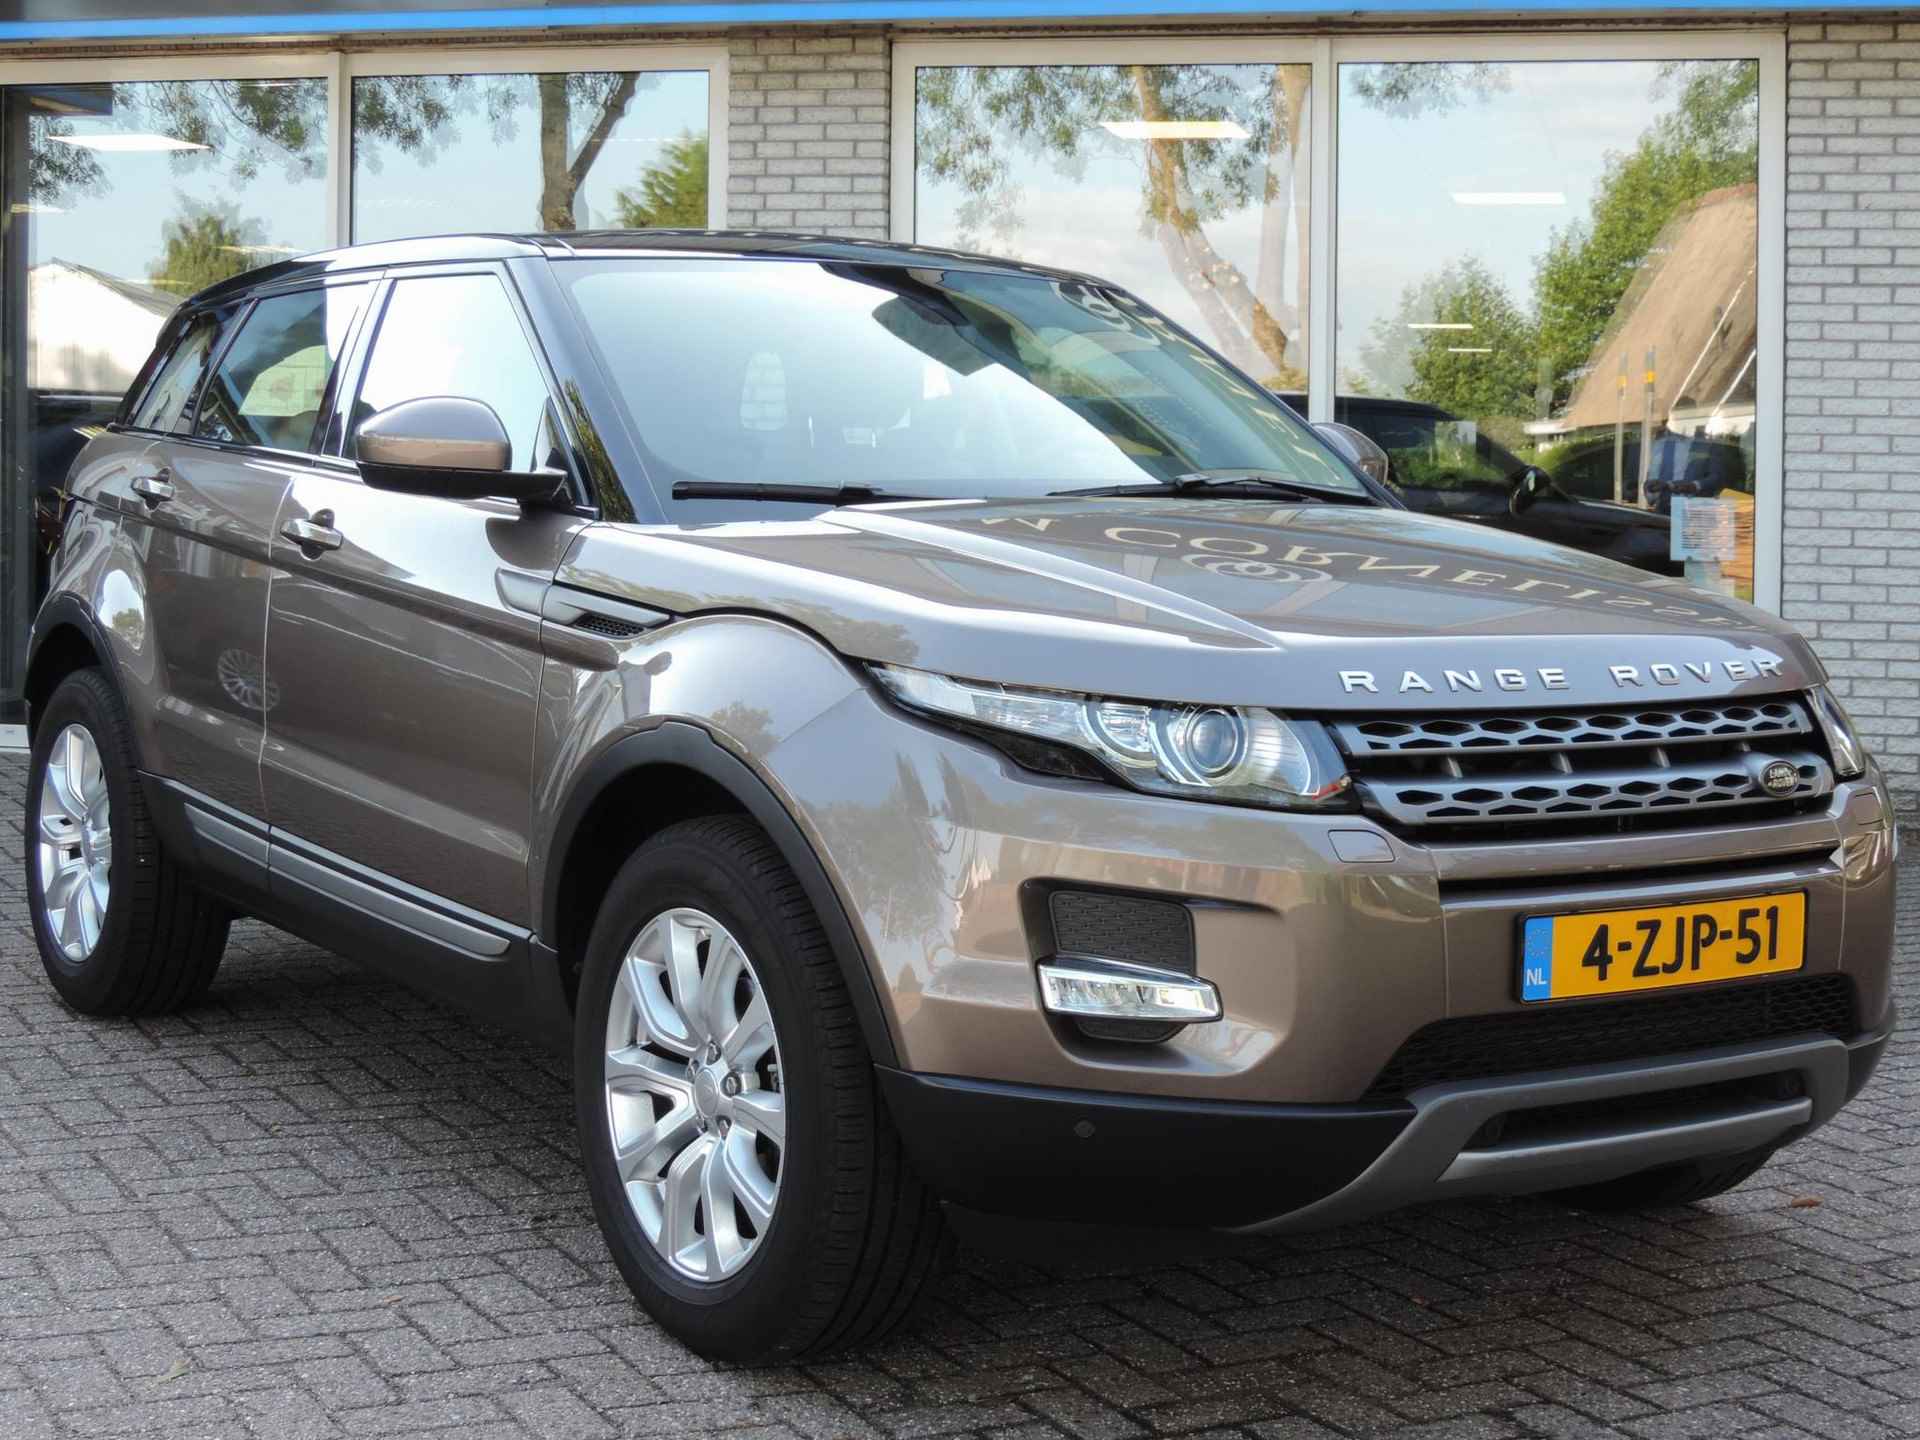 Land Rover Range Rover Evoque 2.2 TD4 Aut 4WD Pure Business Edition Pano Camera - 7/33